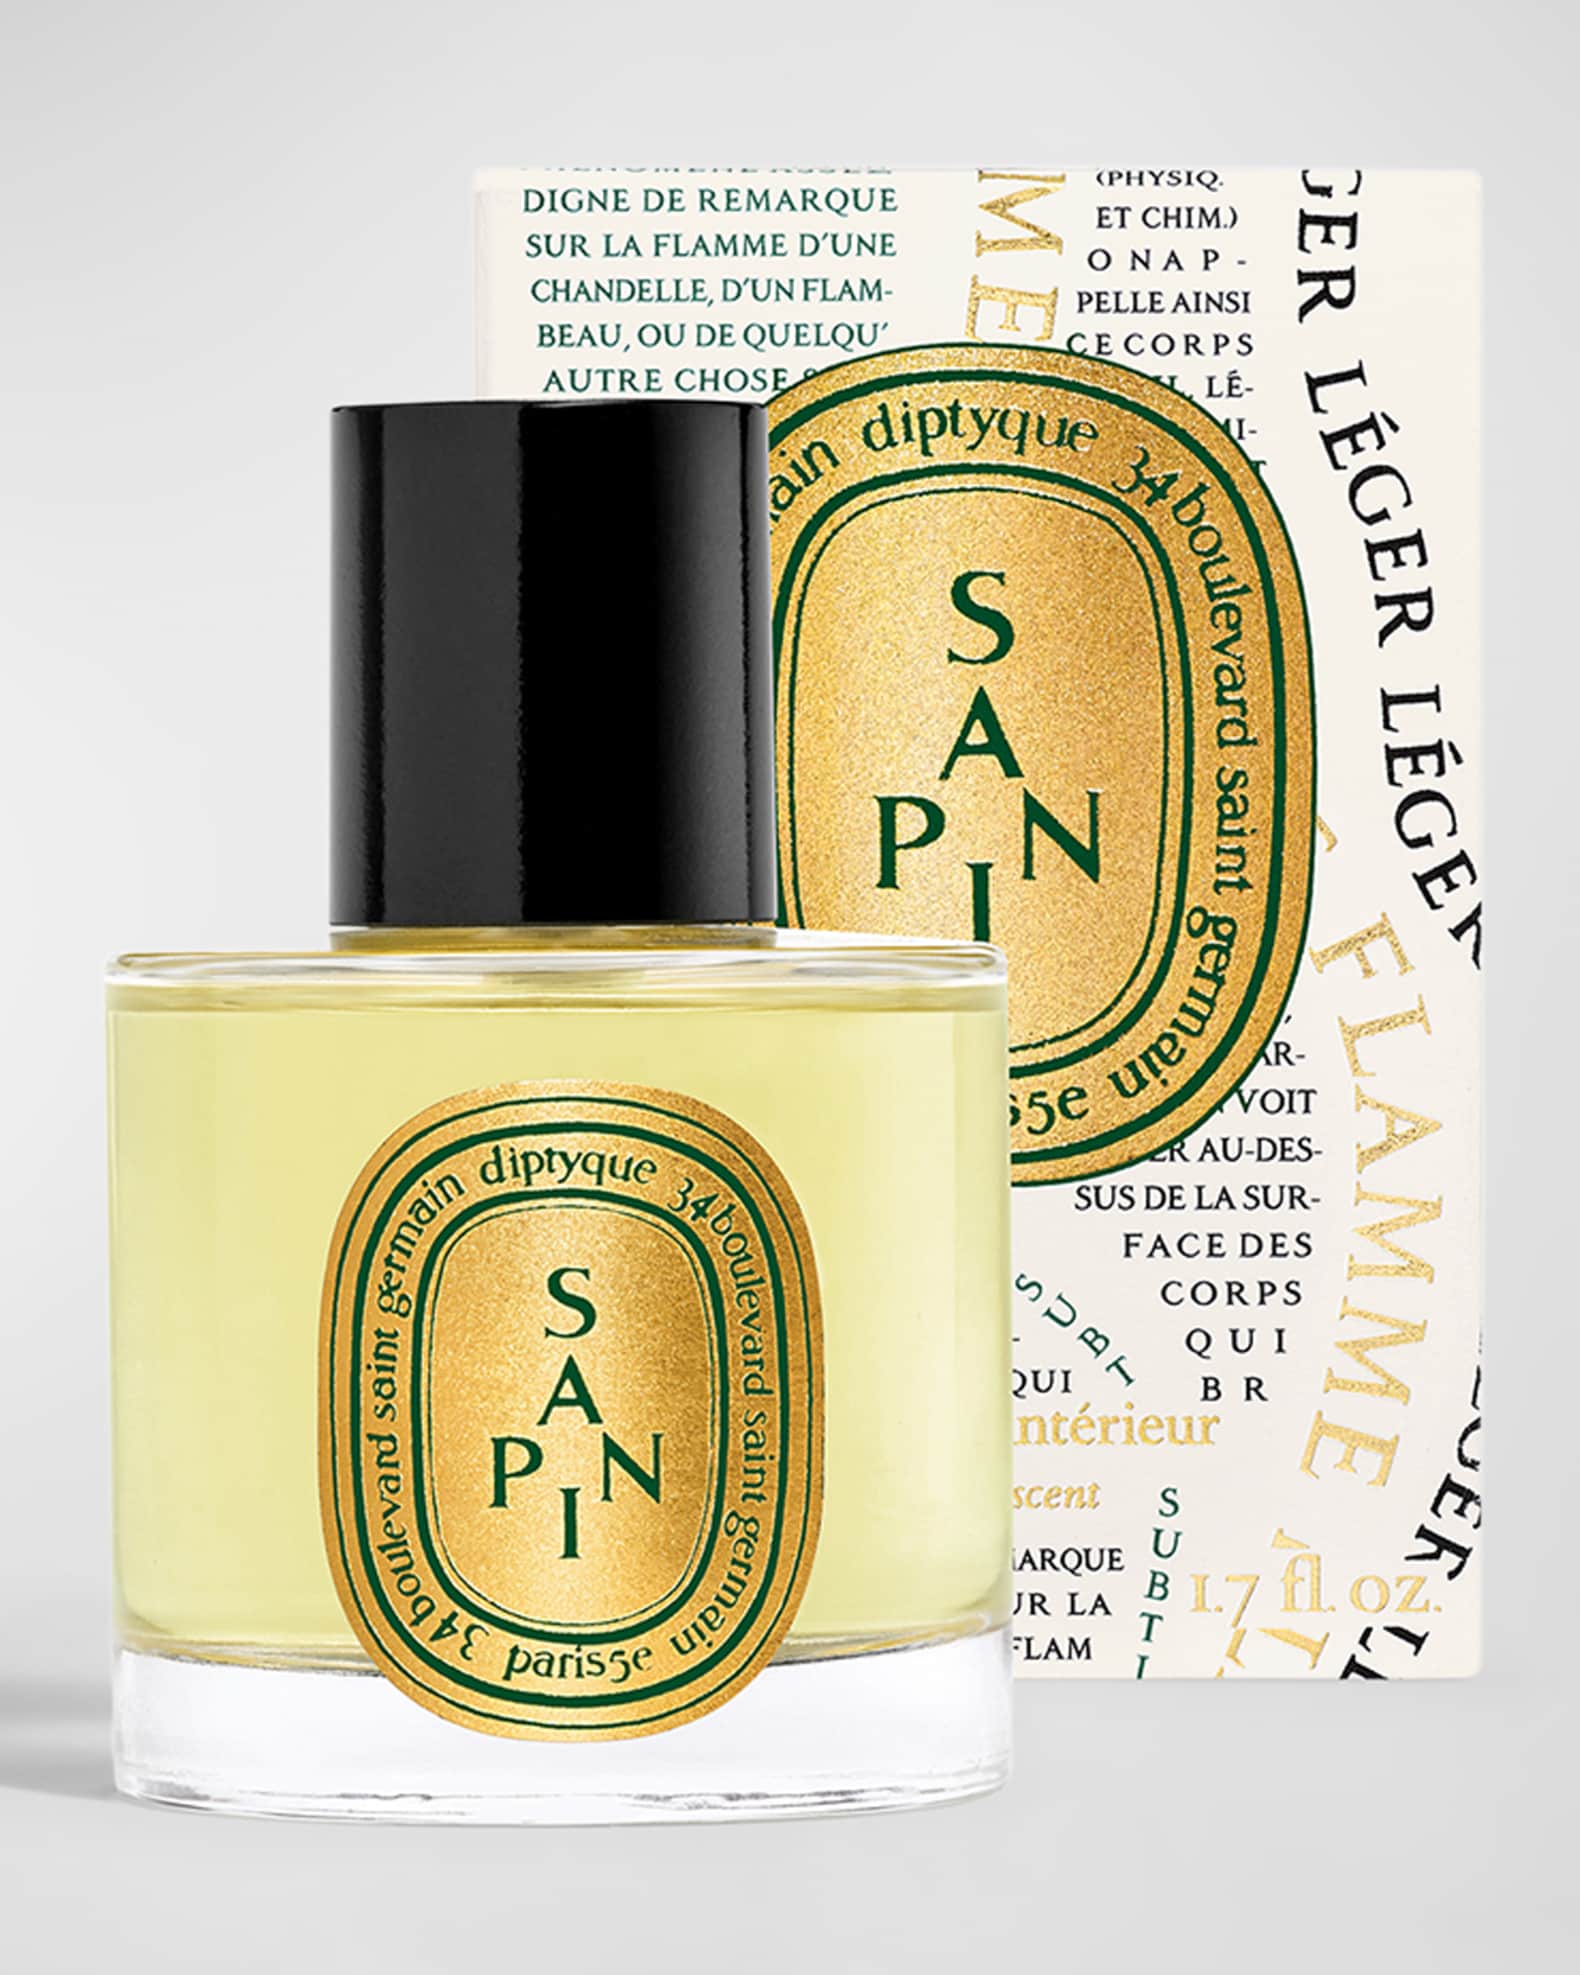 Diptyque Sapin (Pine) Fragrance Room Spray - Limited Edition